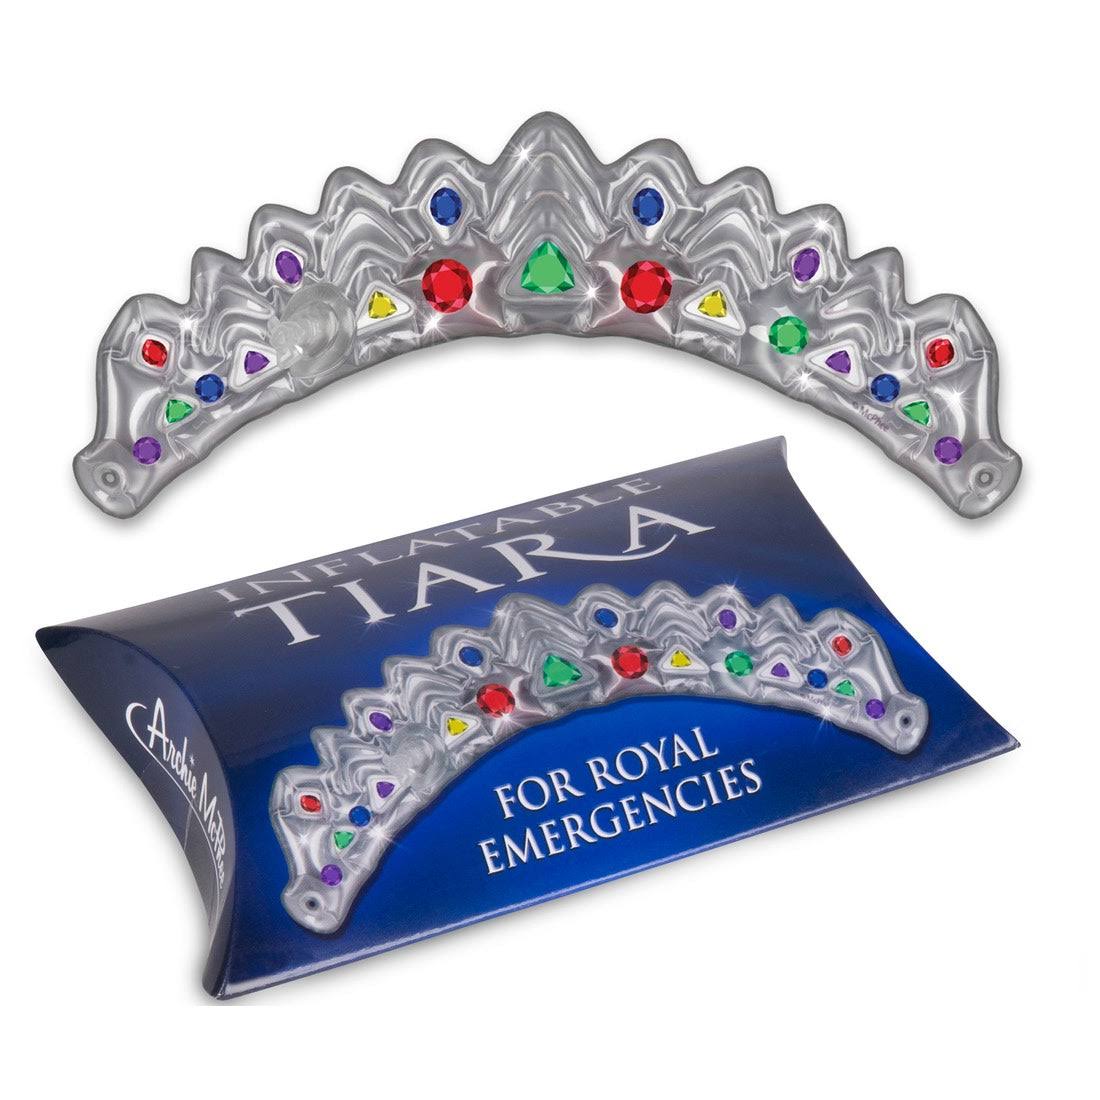 Character Goods - Archie McPhee - Inflatable Tiara New 12839 Multi-Colored 8"